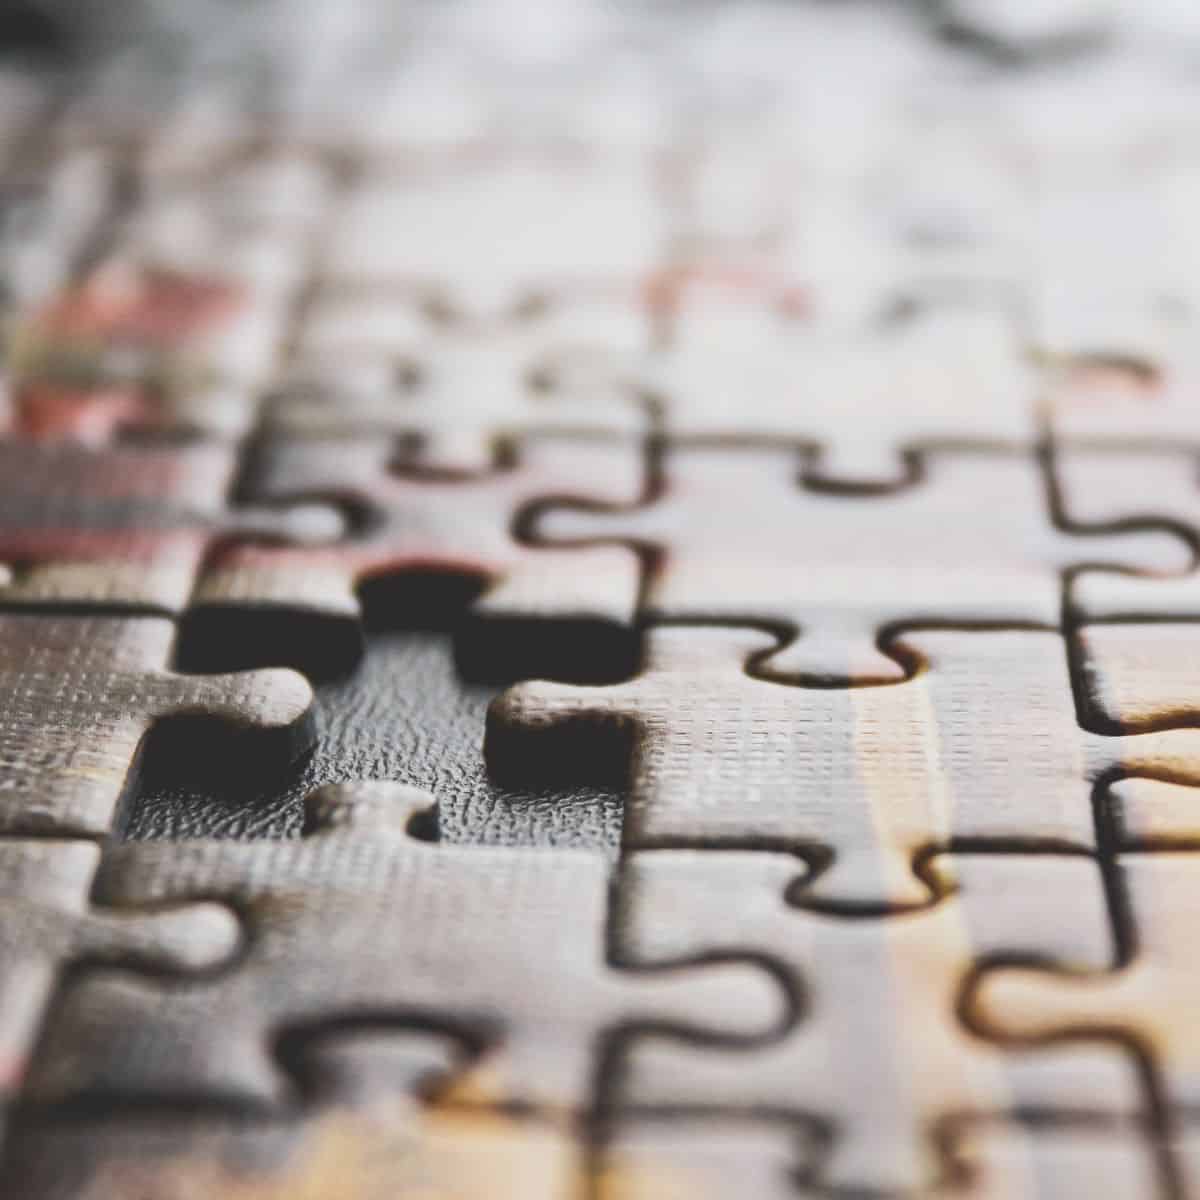 A close-up of a jigsaw puzzle with a single piece missing.